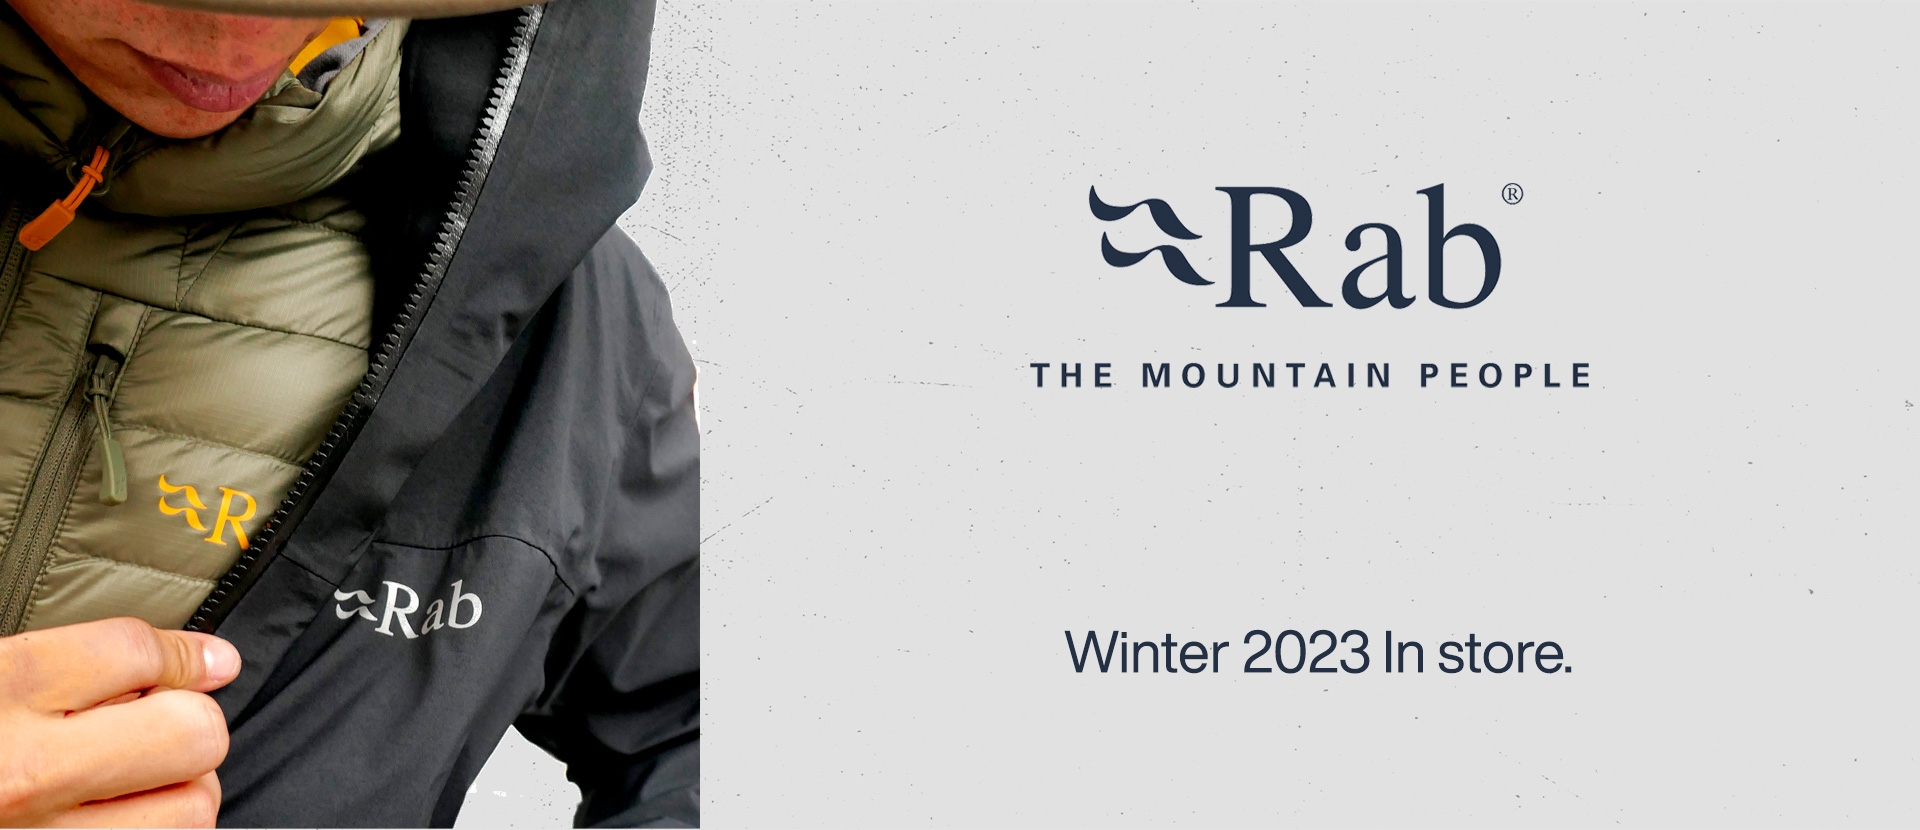 Rab Equipment Technical Outdoor Clothing